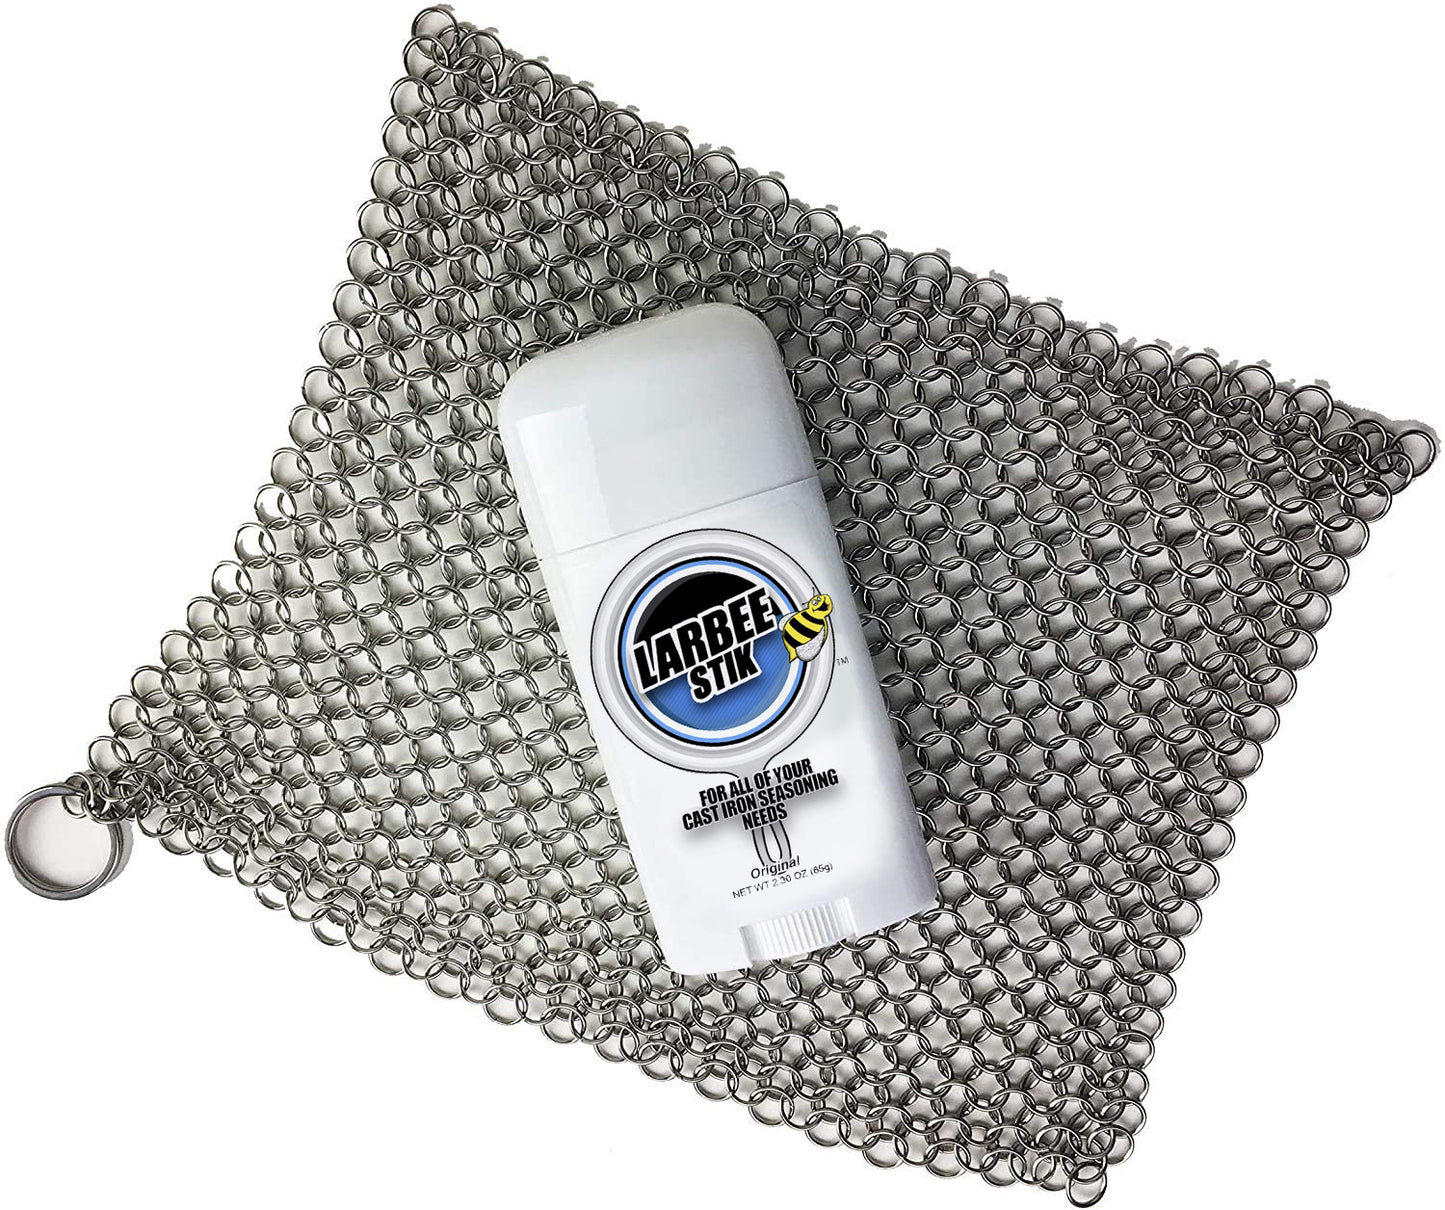 https://crisbee.org/cdn/shop/products/ChainMailScrubberCastIronCleaner_LarbeeStik.jpg?v=1643848989&width=1445